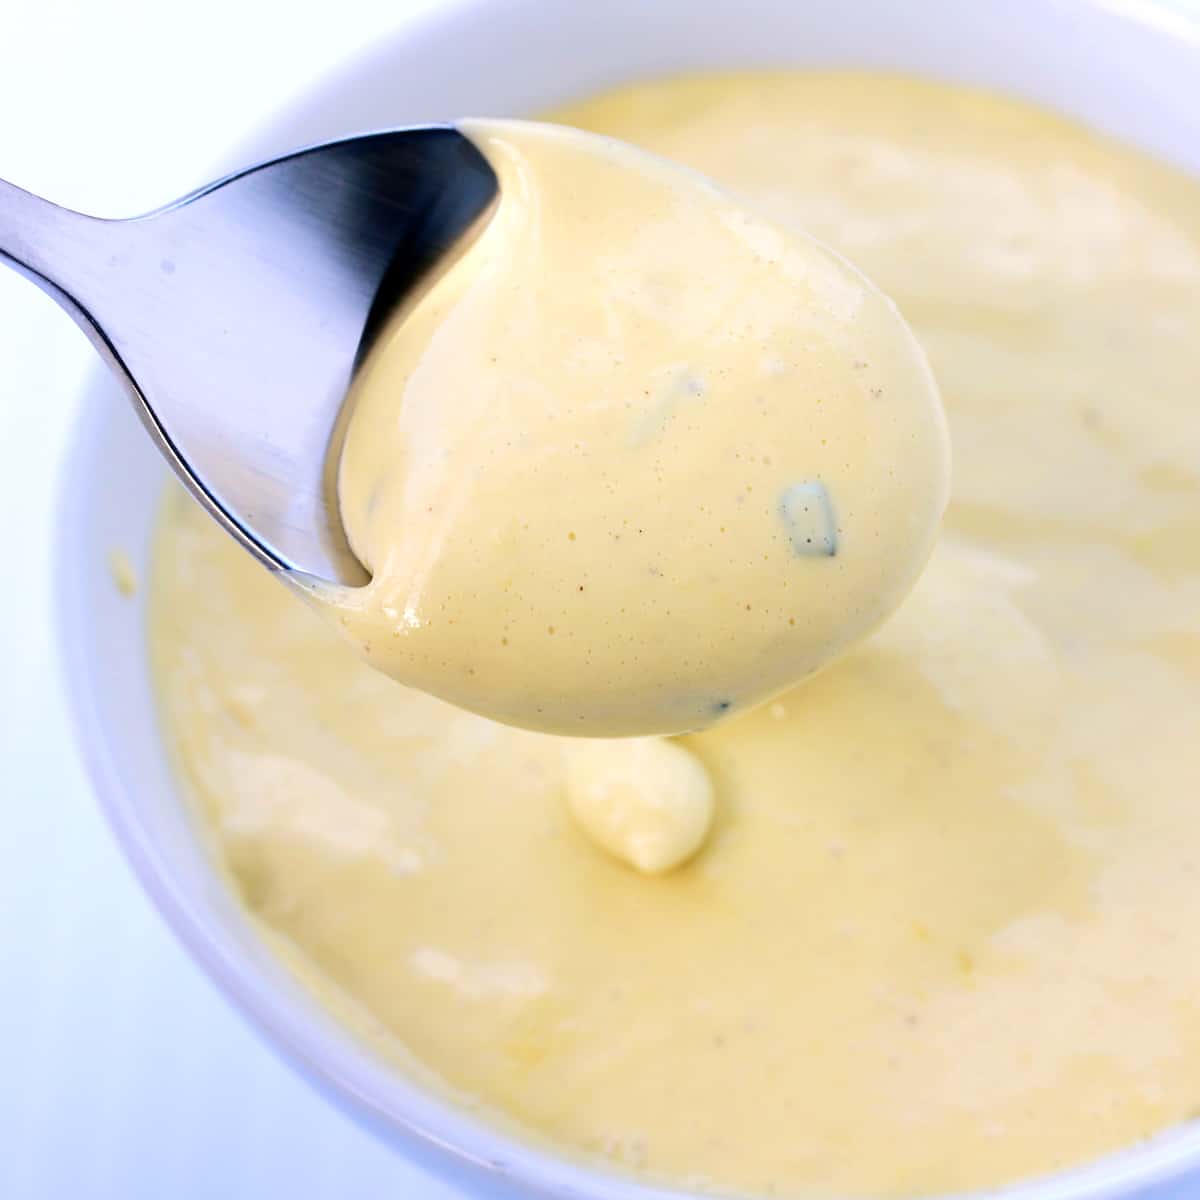 bearnaise sauce recipe French steak condiment classic traditional authentic remoulade tarragon 